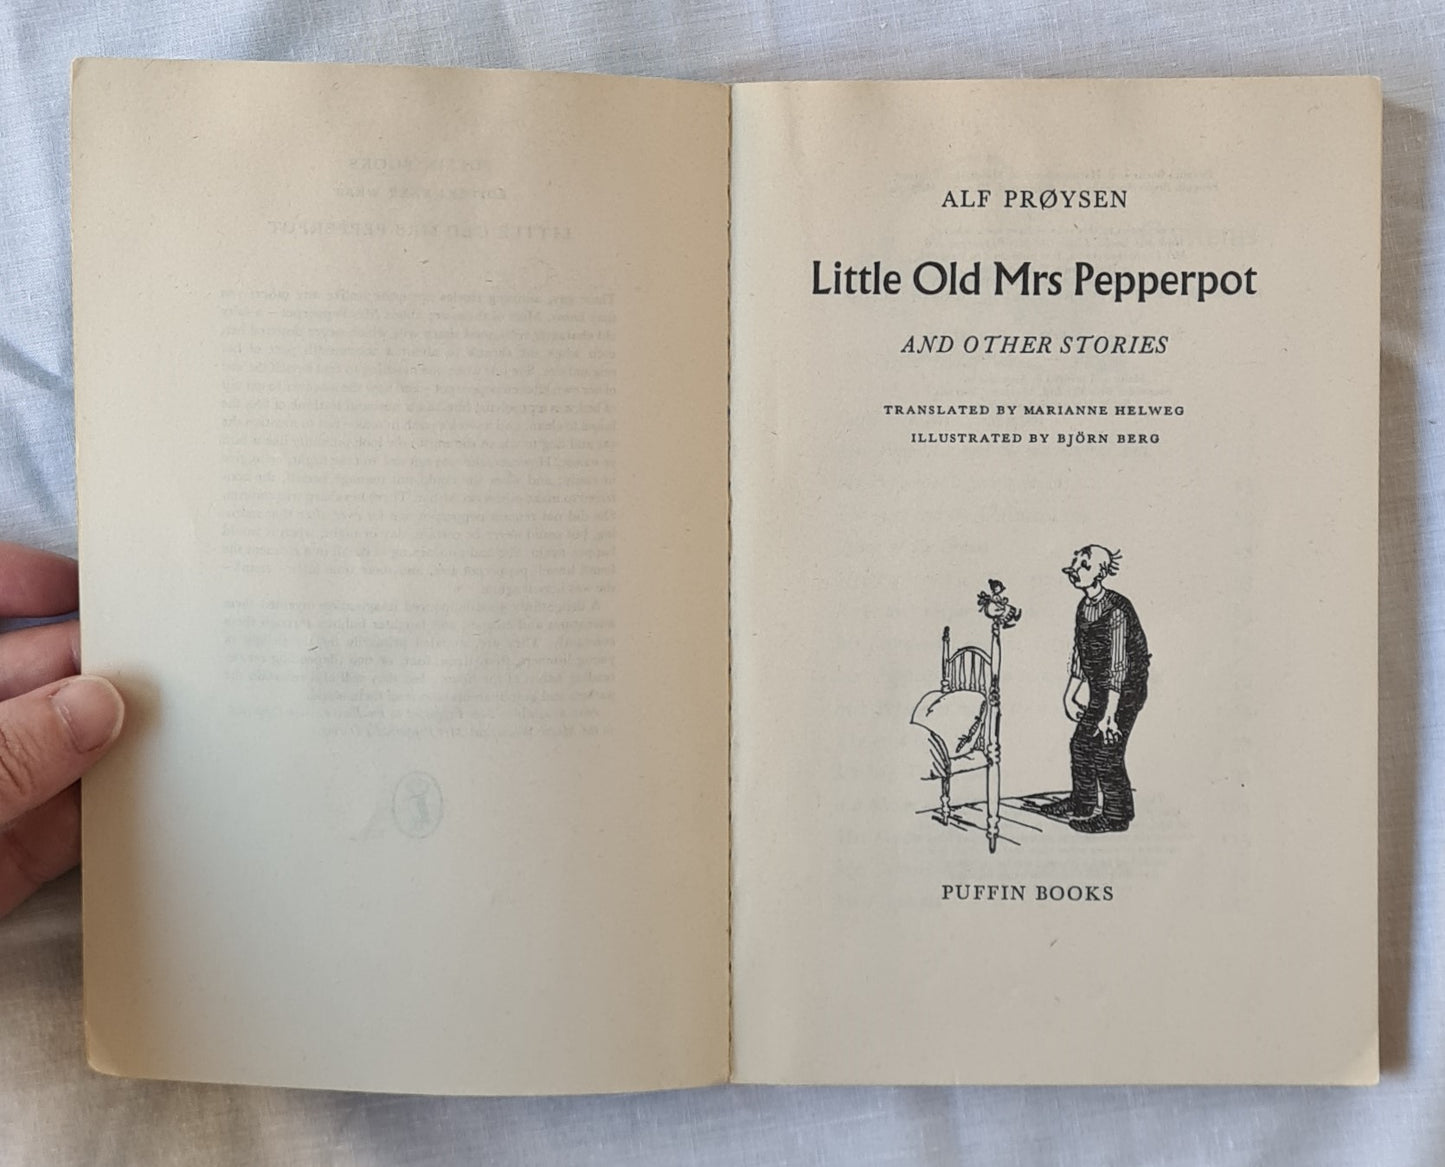 Little Old Mrs Pepperpot by Alf Proysen